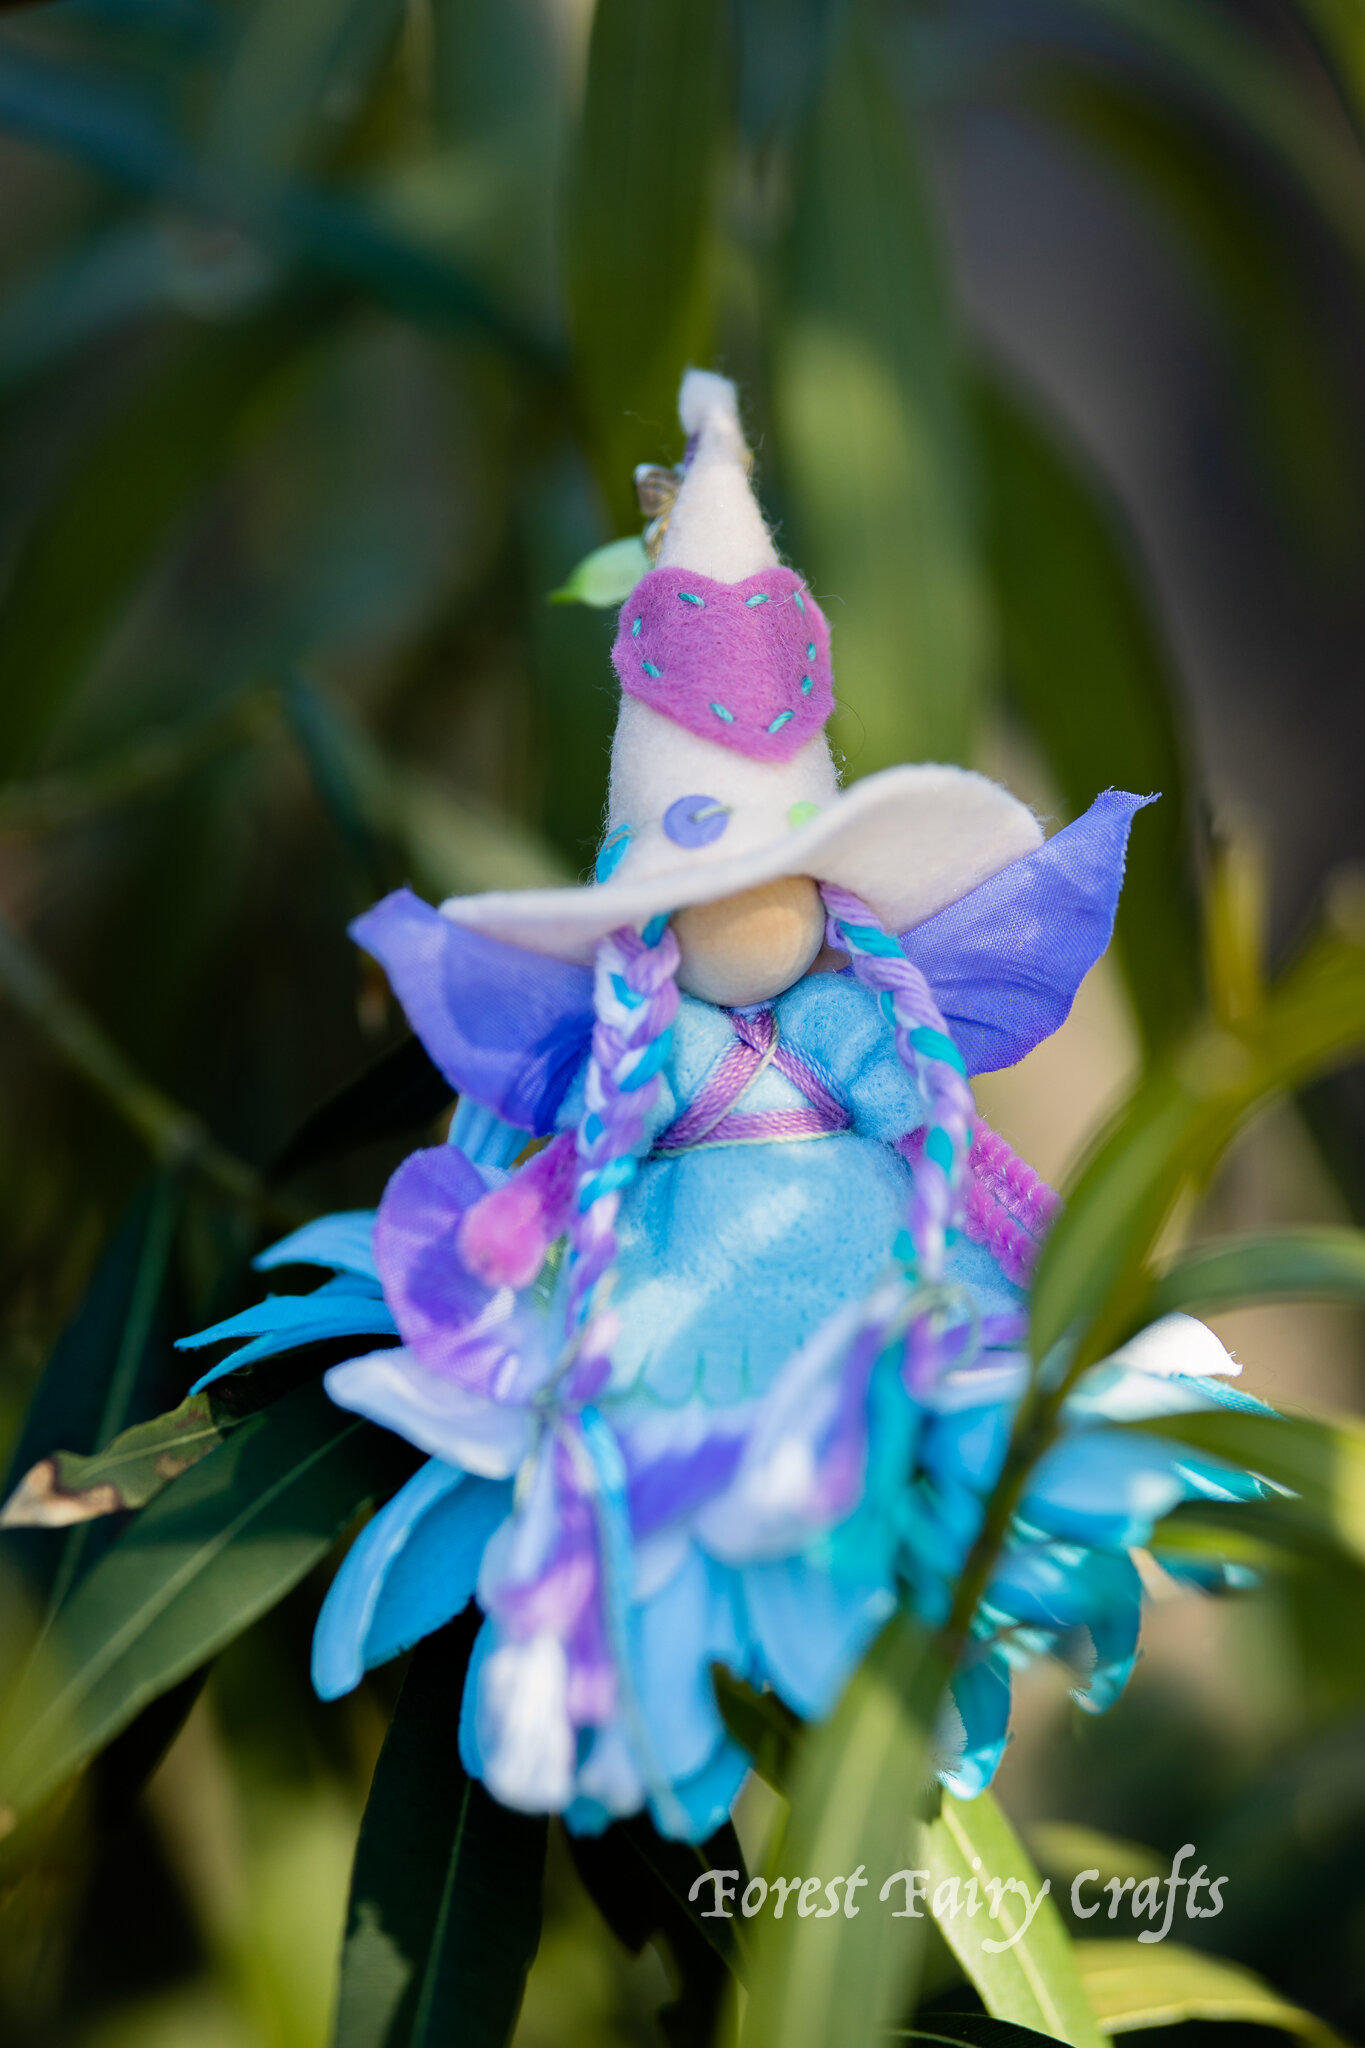 Fairy witch | Directions are in the Forest Fairy Crafts book by Lenka Vodicka-Paredes and Asia Currie | Bendy dolls for children | Waldorf and natural crafts teaching sewing and handwork